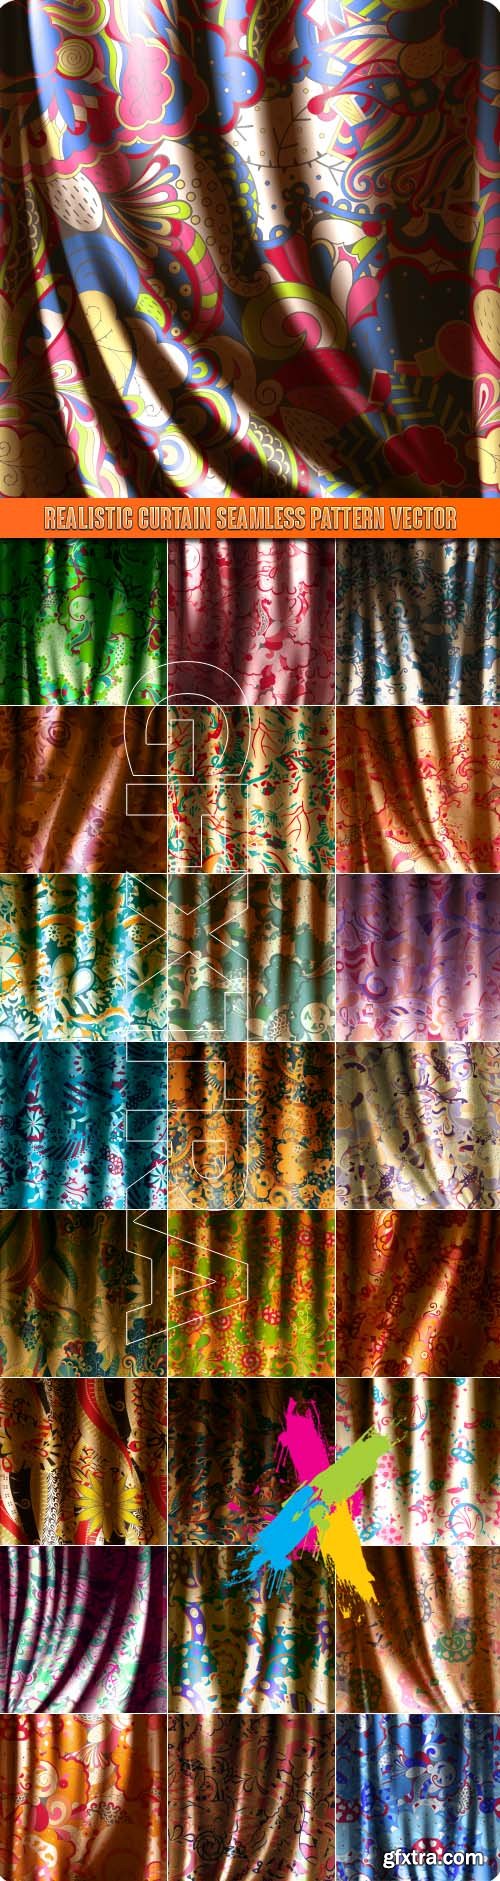 Realistic curtain seamless pattern vector